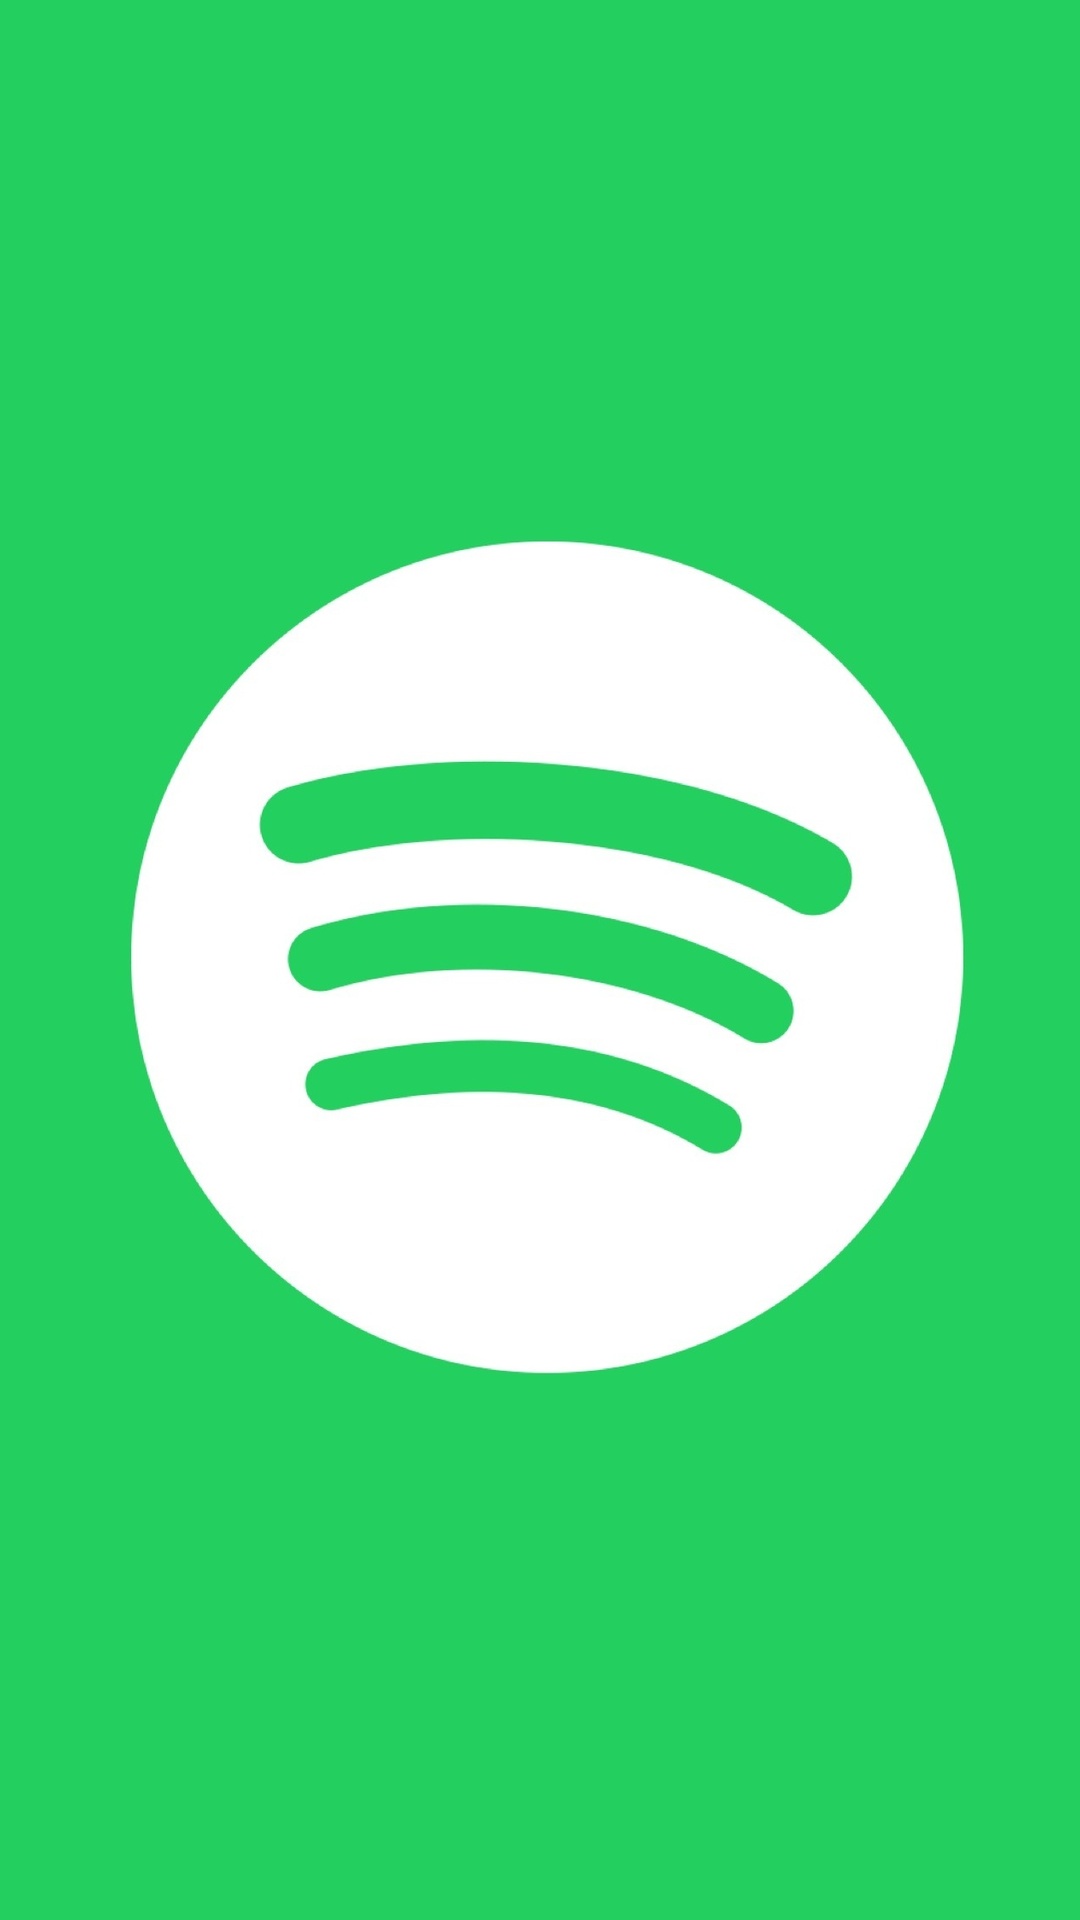 Spotify Logo iPhone 6s, 6 Plus, Pixel xl , One Plus 3t, 5 HD 4k Wallpaper, Image, Background, Photo and Picture